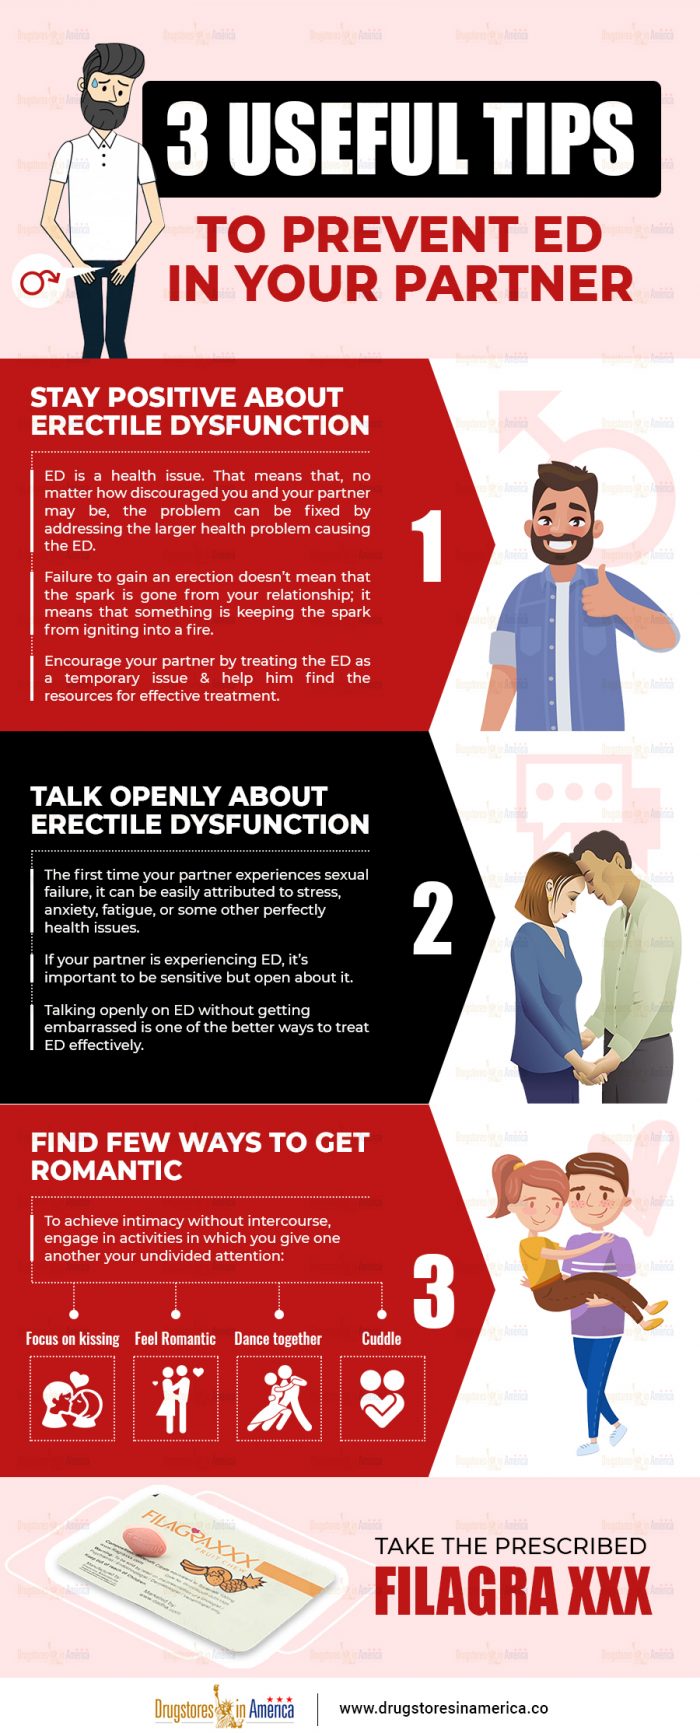 3 Useful Tips to Prevent ED in Your Partner